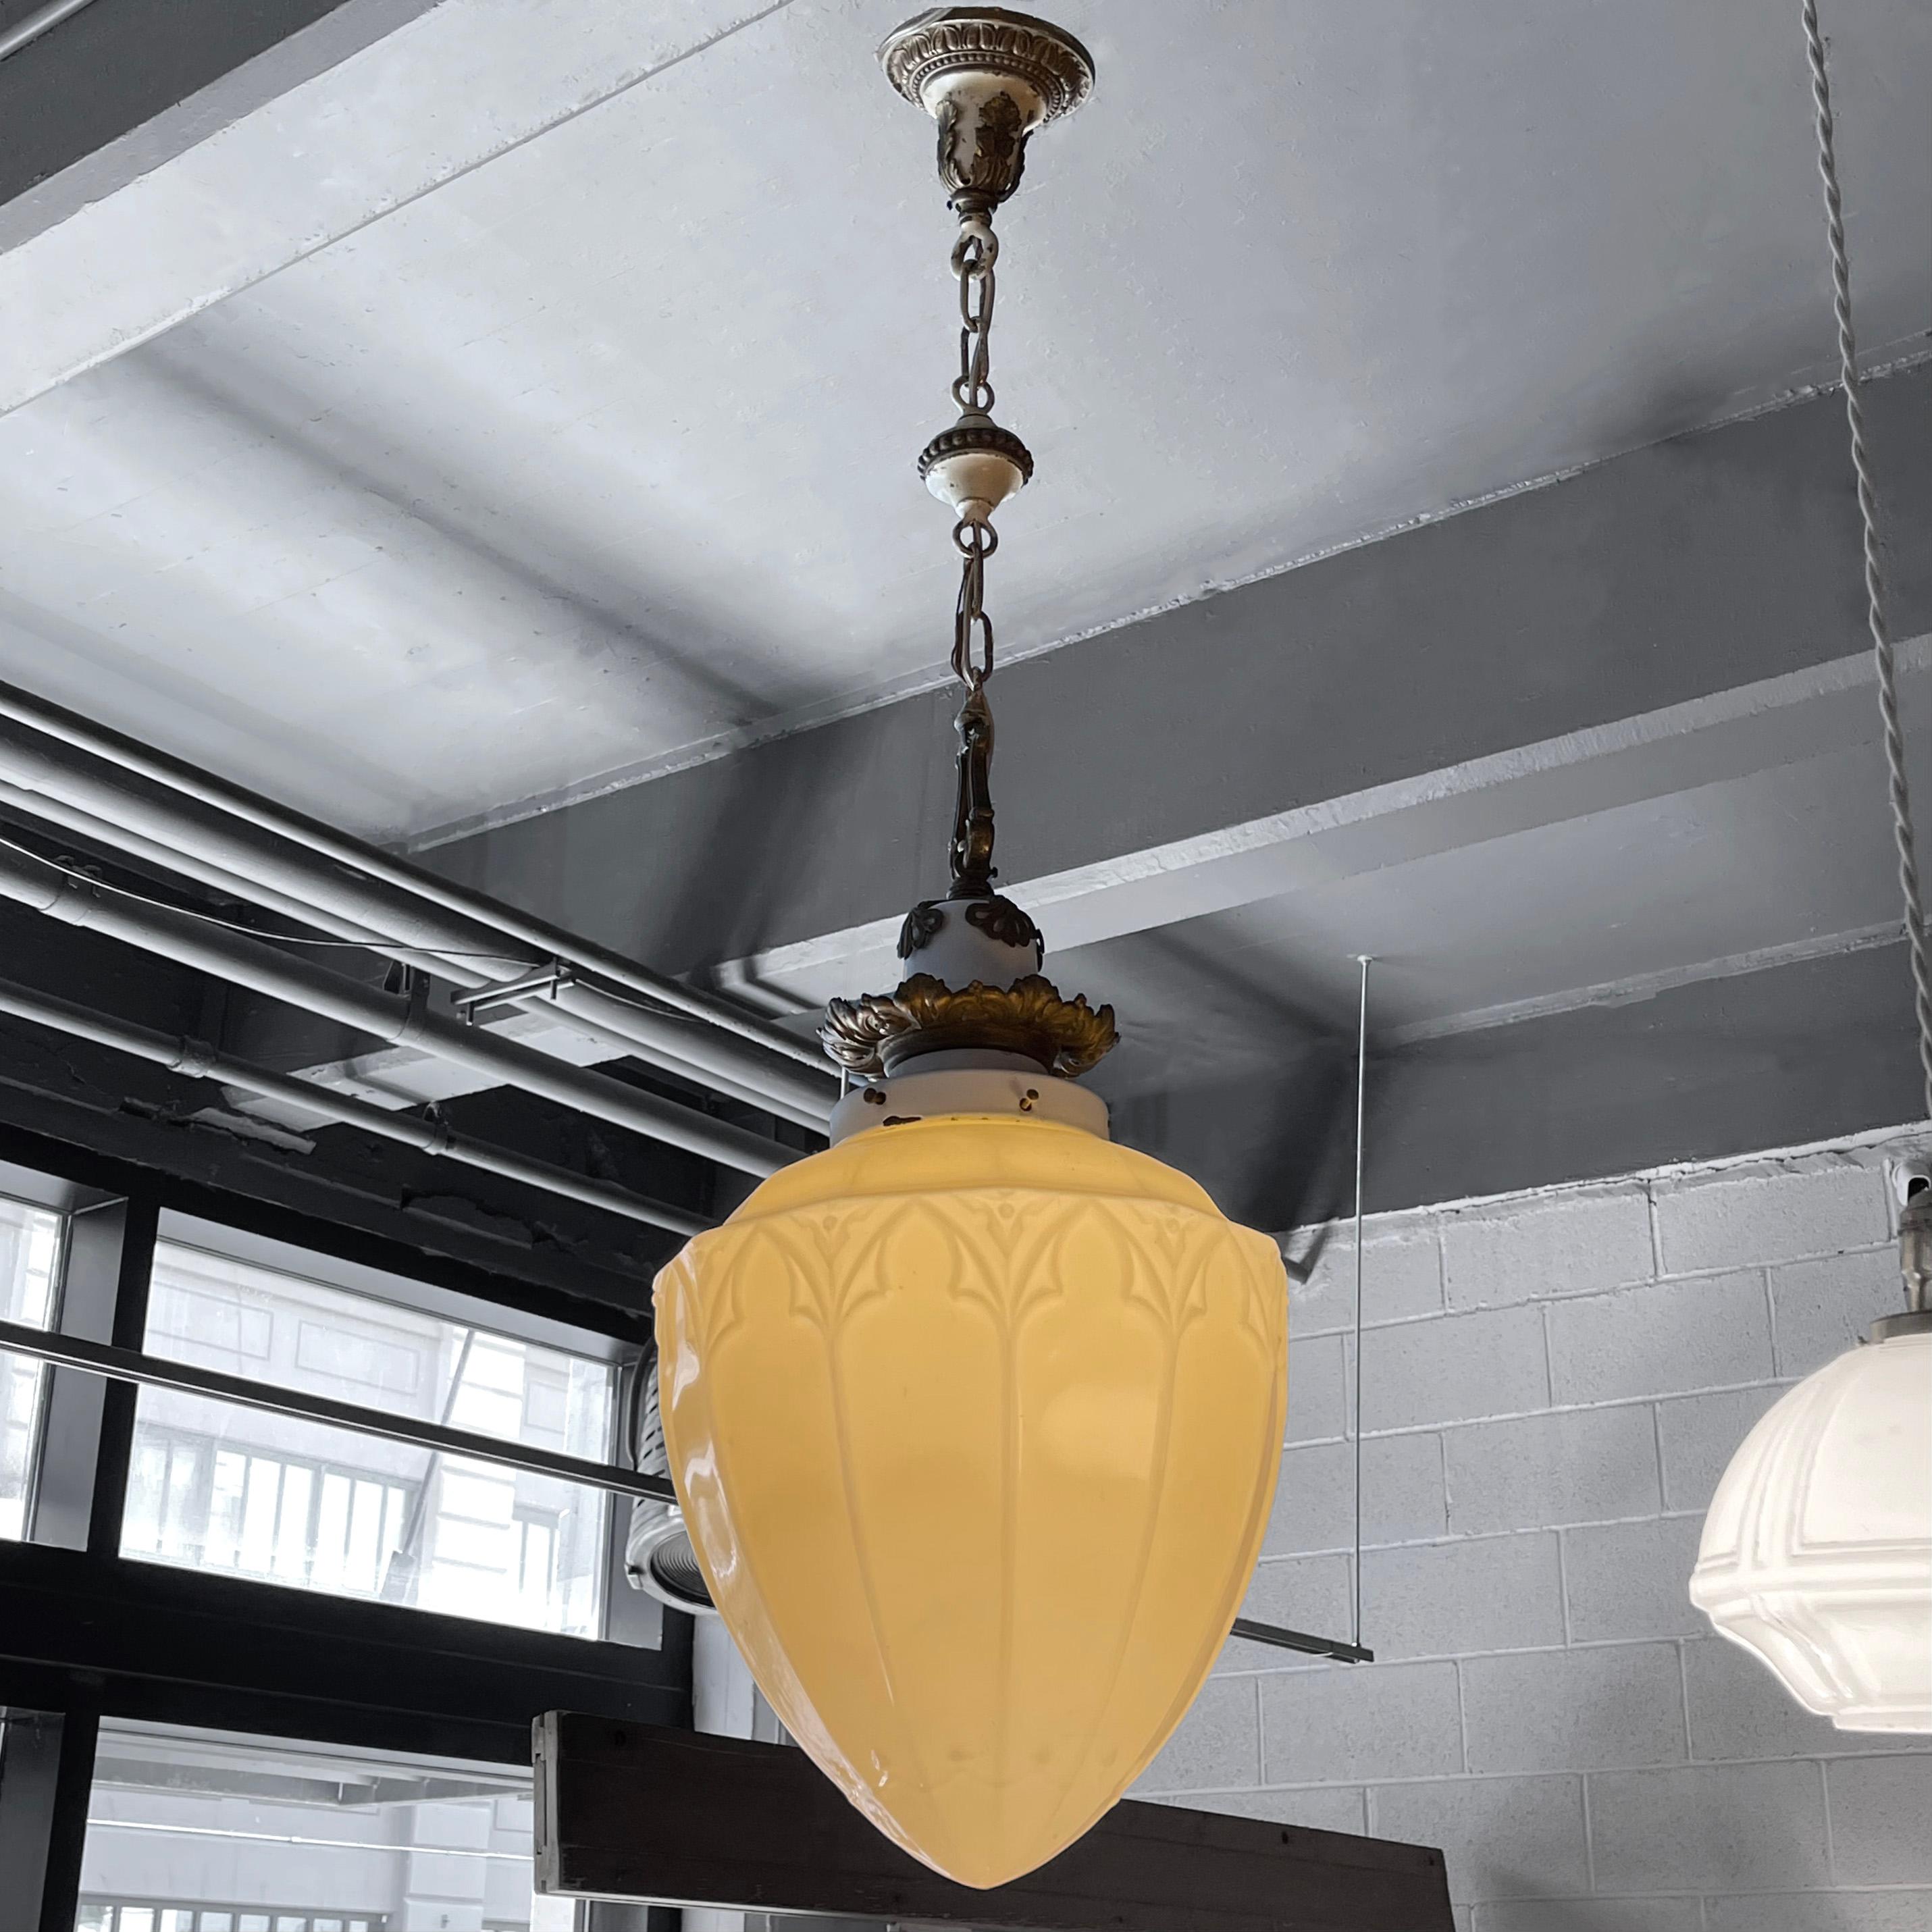 Early 20th century, Victorian, pendant light features a pressed vaseline glass shade with ornate, brass, filigree hardware with enamel accents. The pendant hangs at an overall height of 46 inches but can be adjusted. The height of the shade is 15